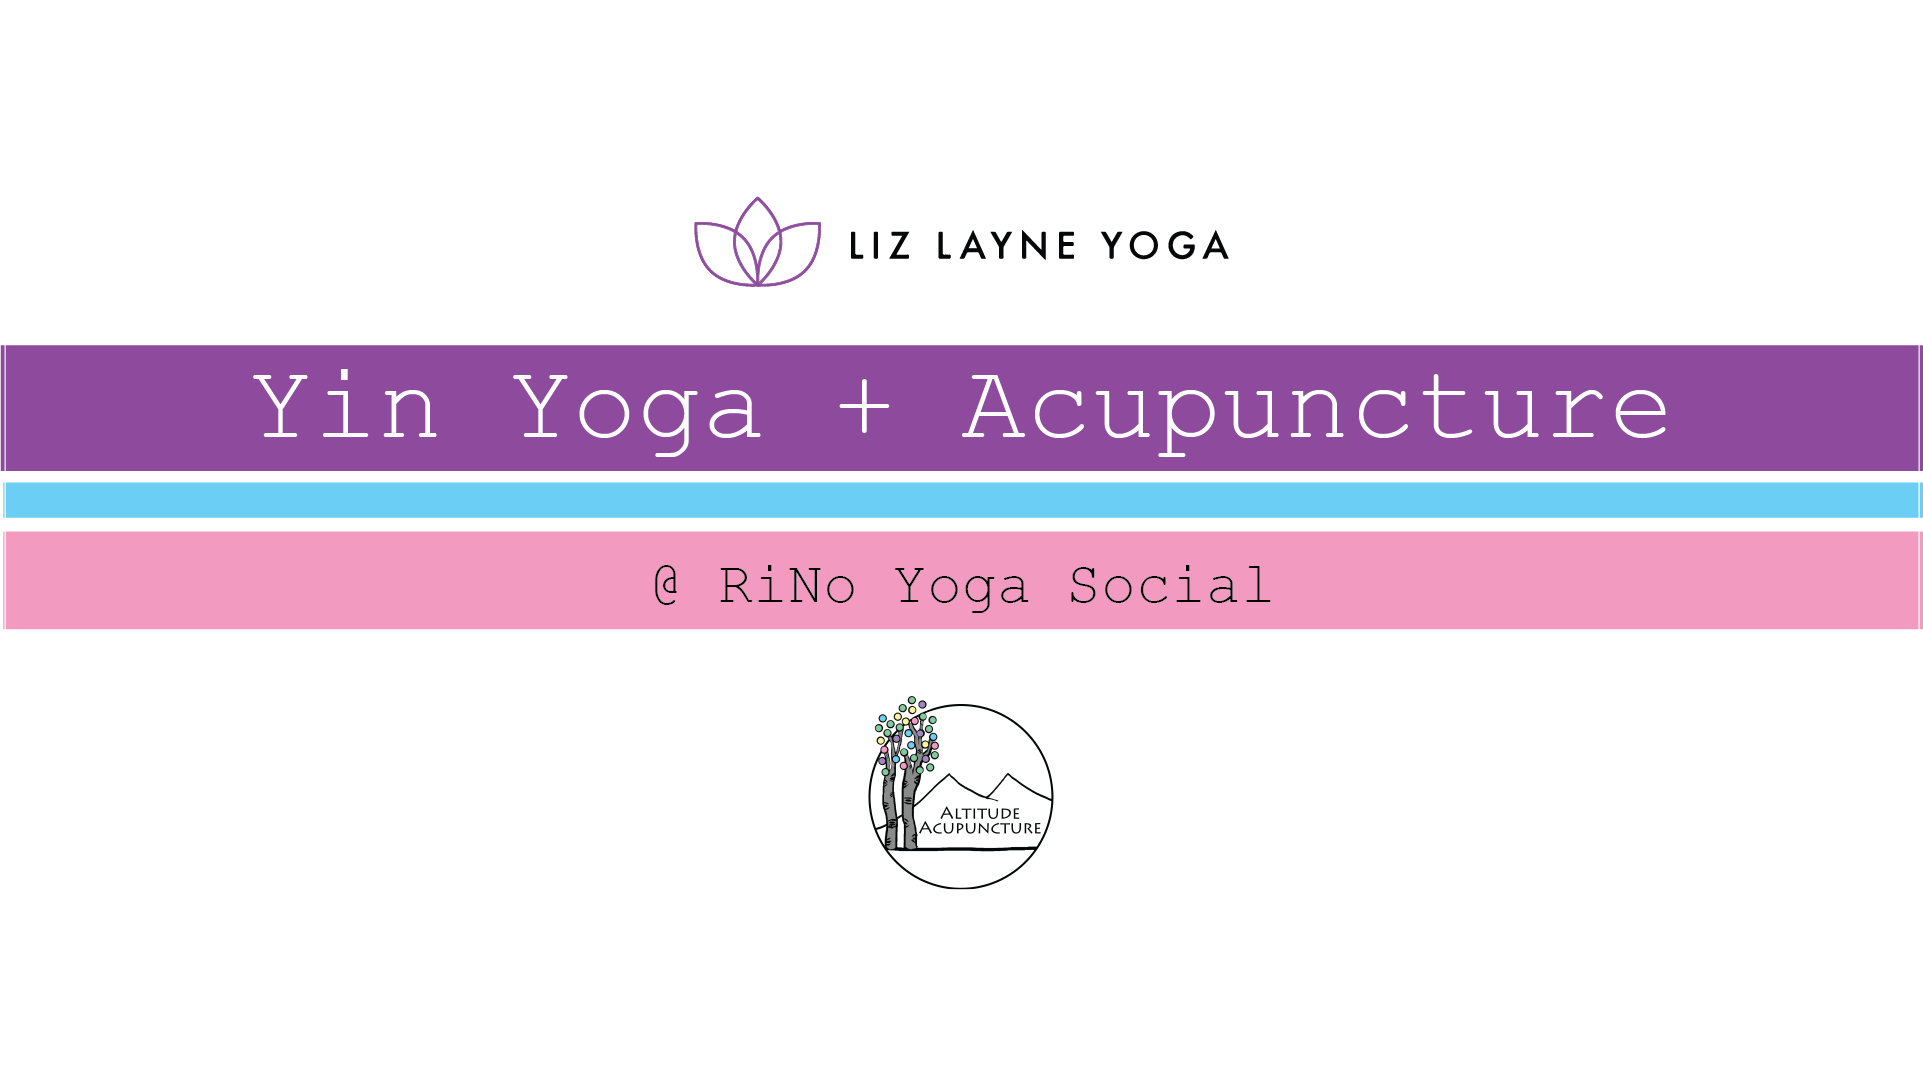 Yin Yoga + Acupuncture w/ Liz Layne and Altitude Acupuncture